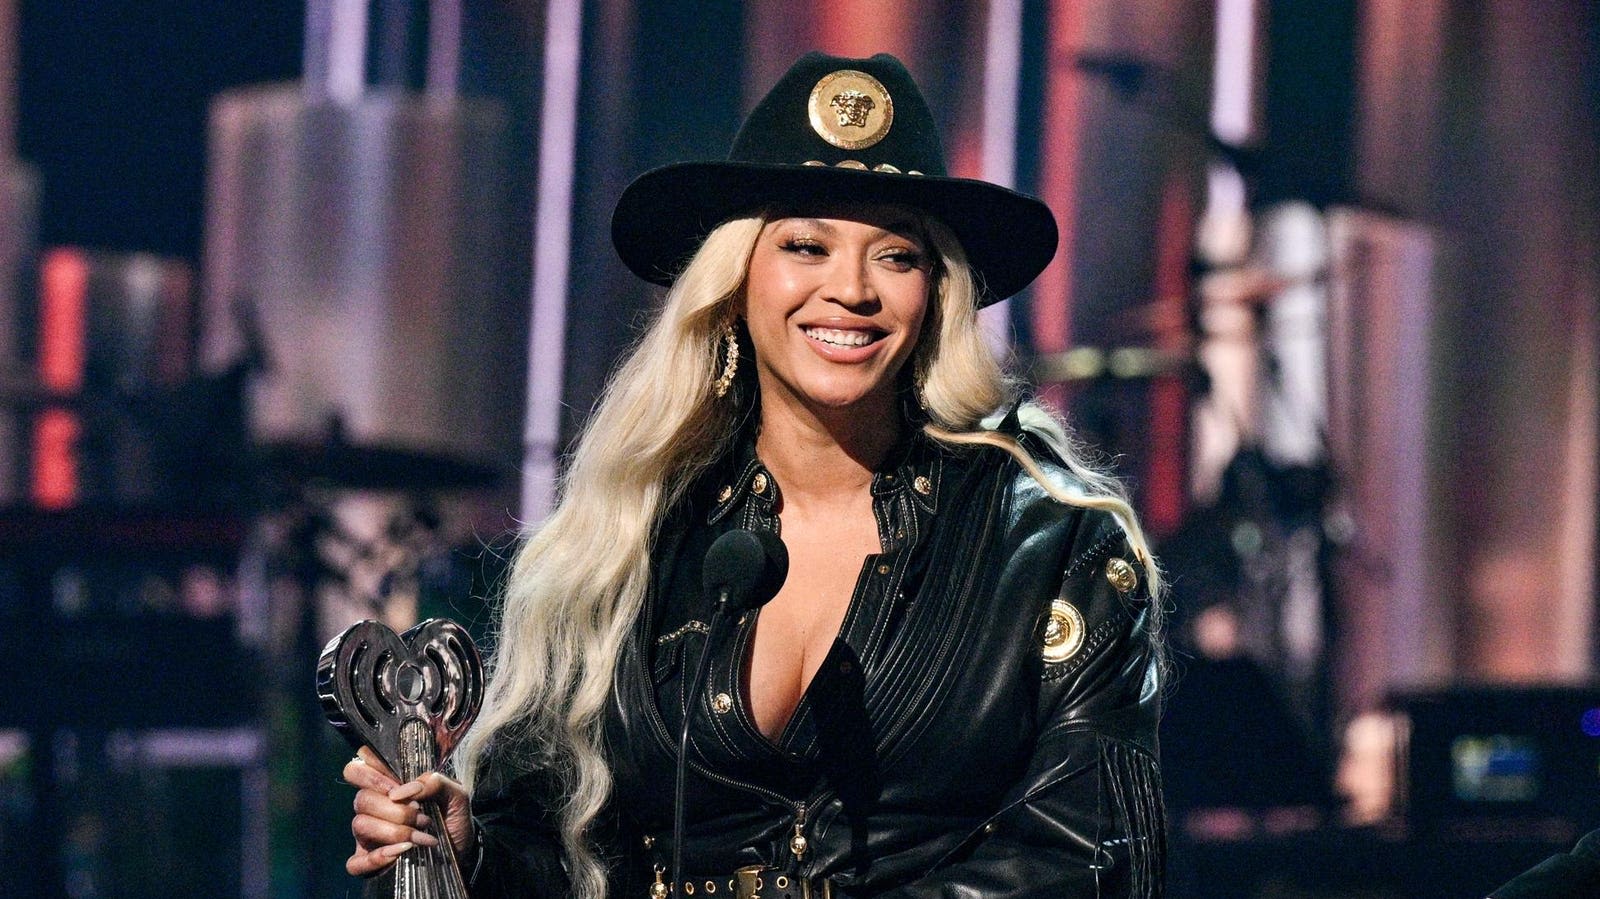 Will Beyoncé Make A Surprise Appearance At Stagecoach? Here’s Why Fans Think So.